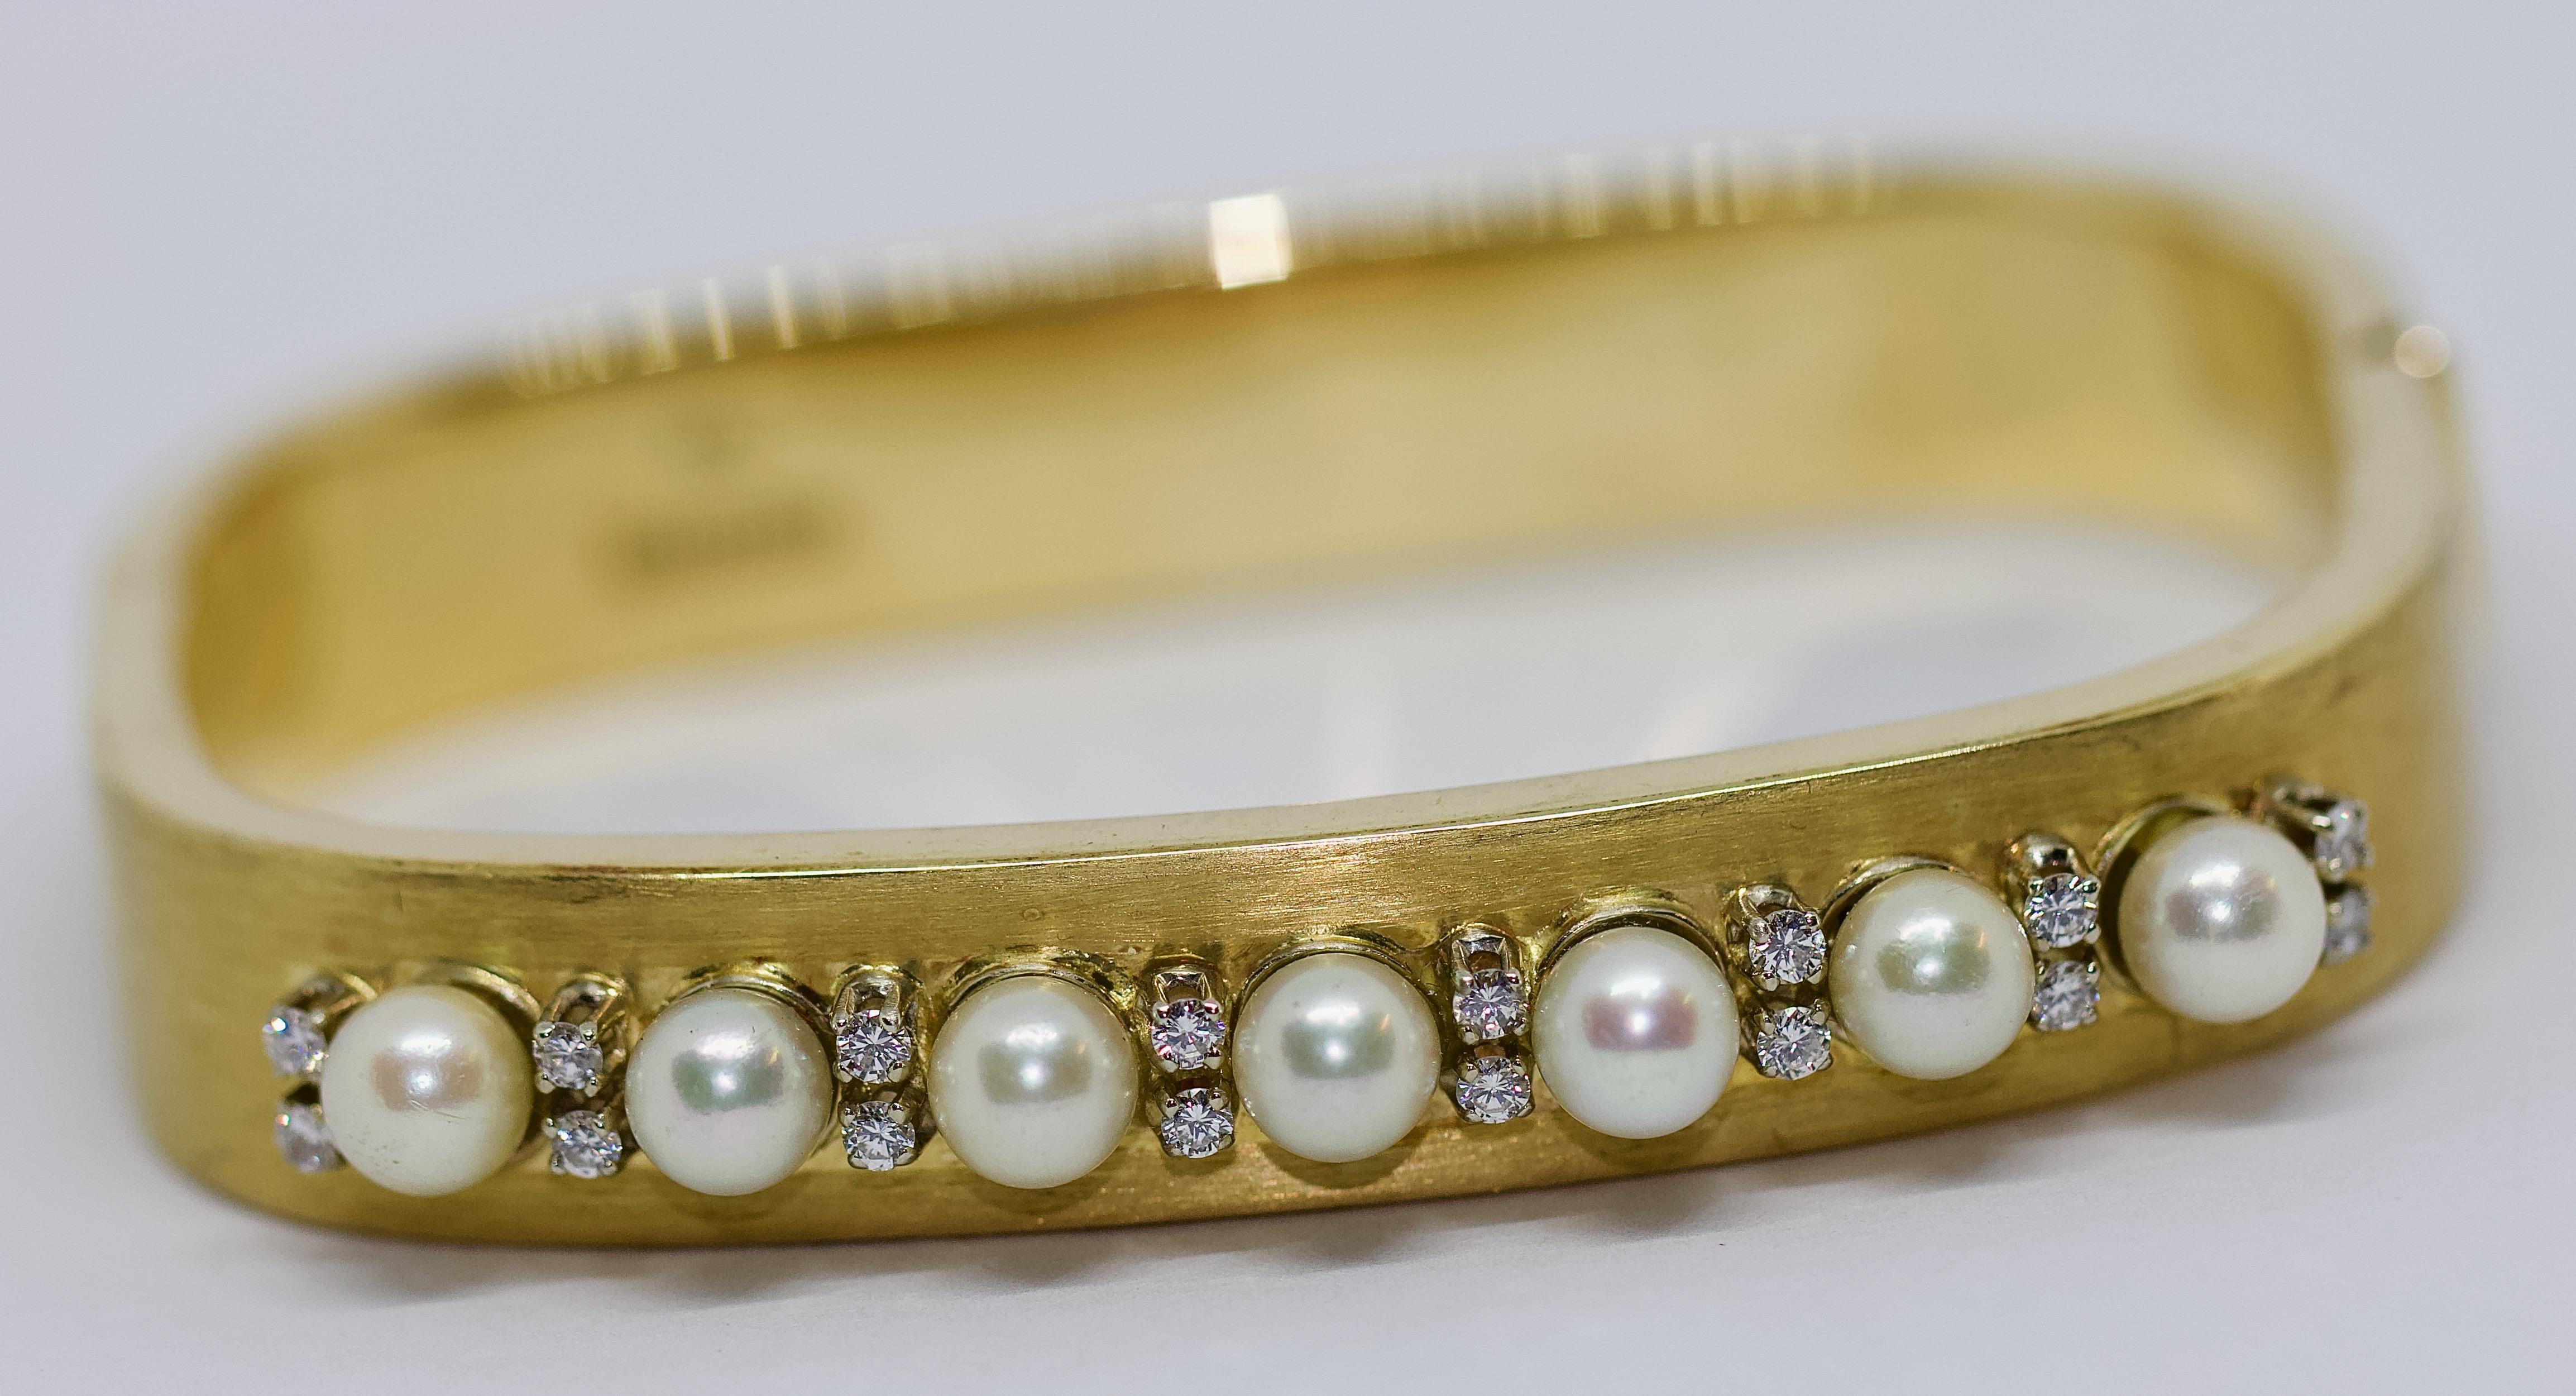 Ladies Bangle, 14K Gold, with Pearls and Diamonds.

Diamonds, very good quality, white.

Bangle is hallmarked.

Including certificate of authenticity.